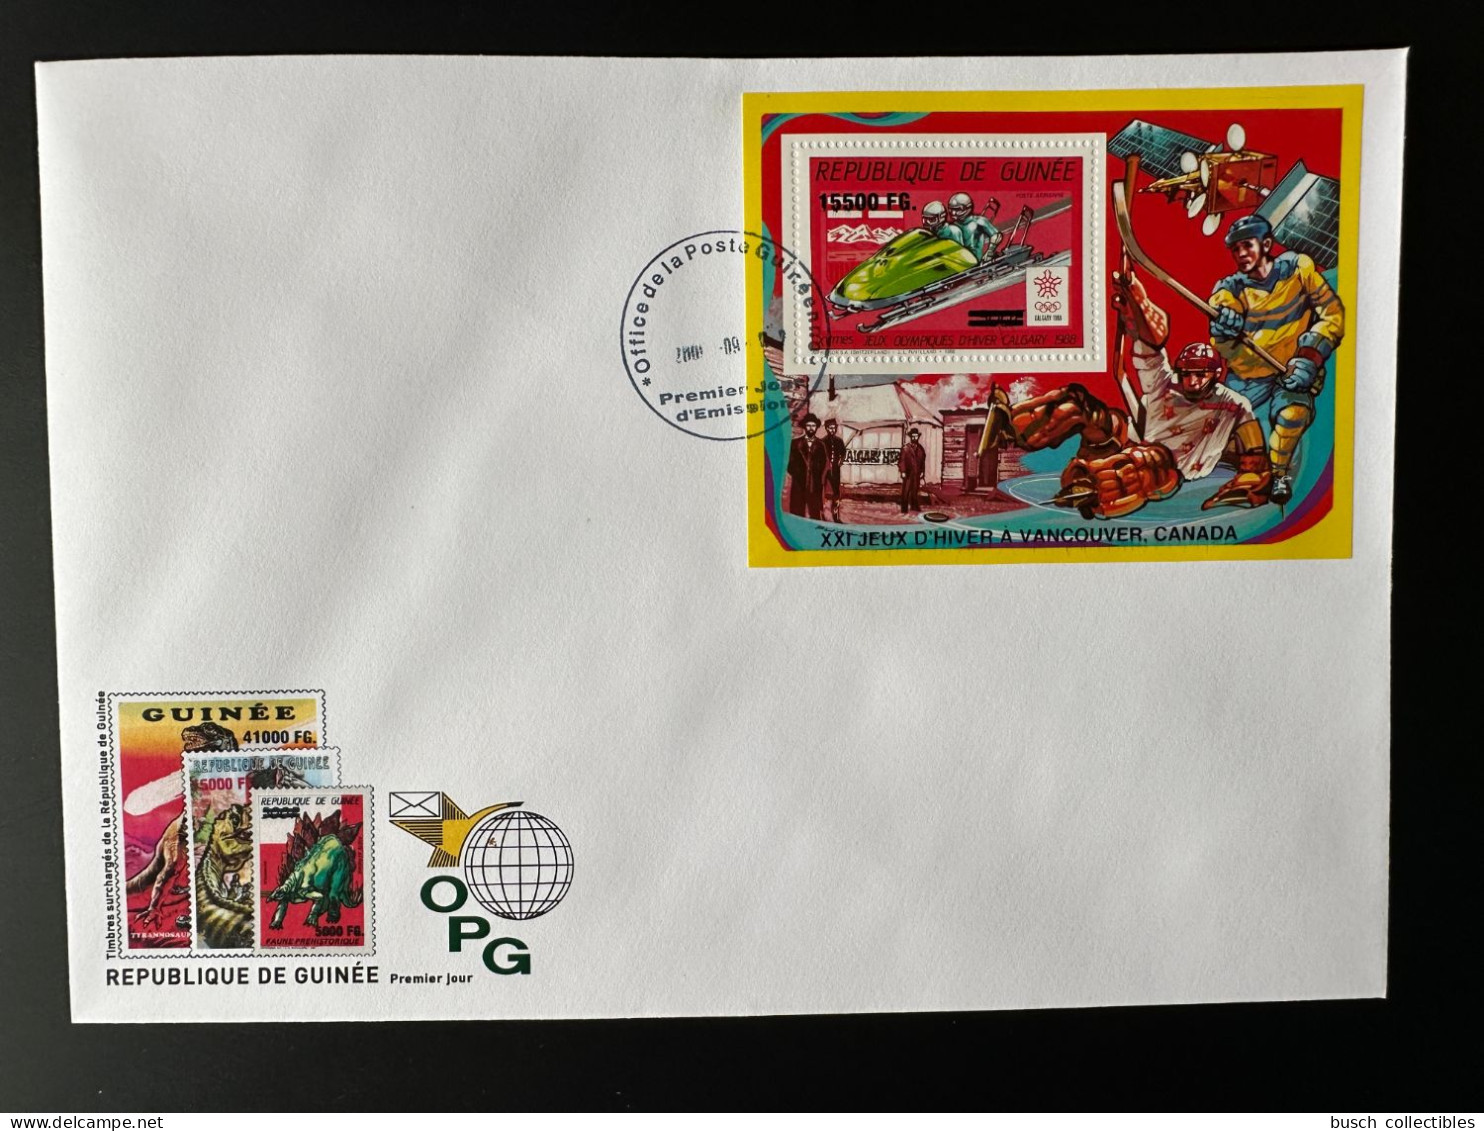 Guinée Guinea 2009 FDC Mi. Bl. 1727 Surch Overprint Winter Olympic Calgary 1988 Vancouver 2010 Jeux Olympiques Bobsleigh - Hiver 1988: Calgary